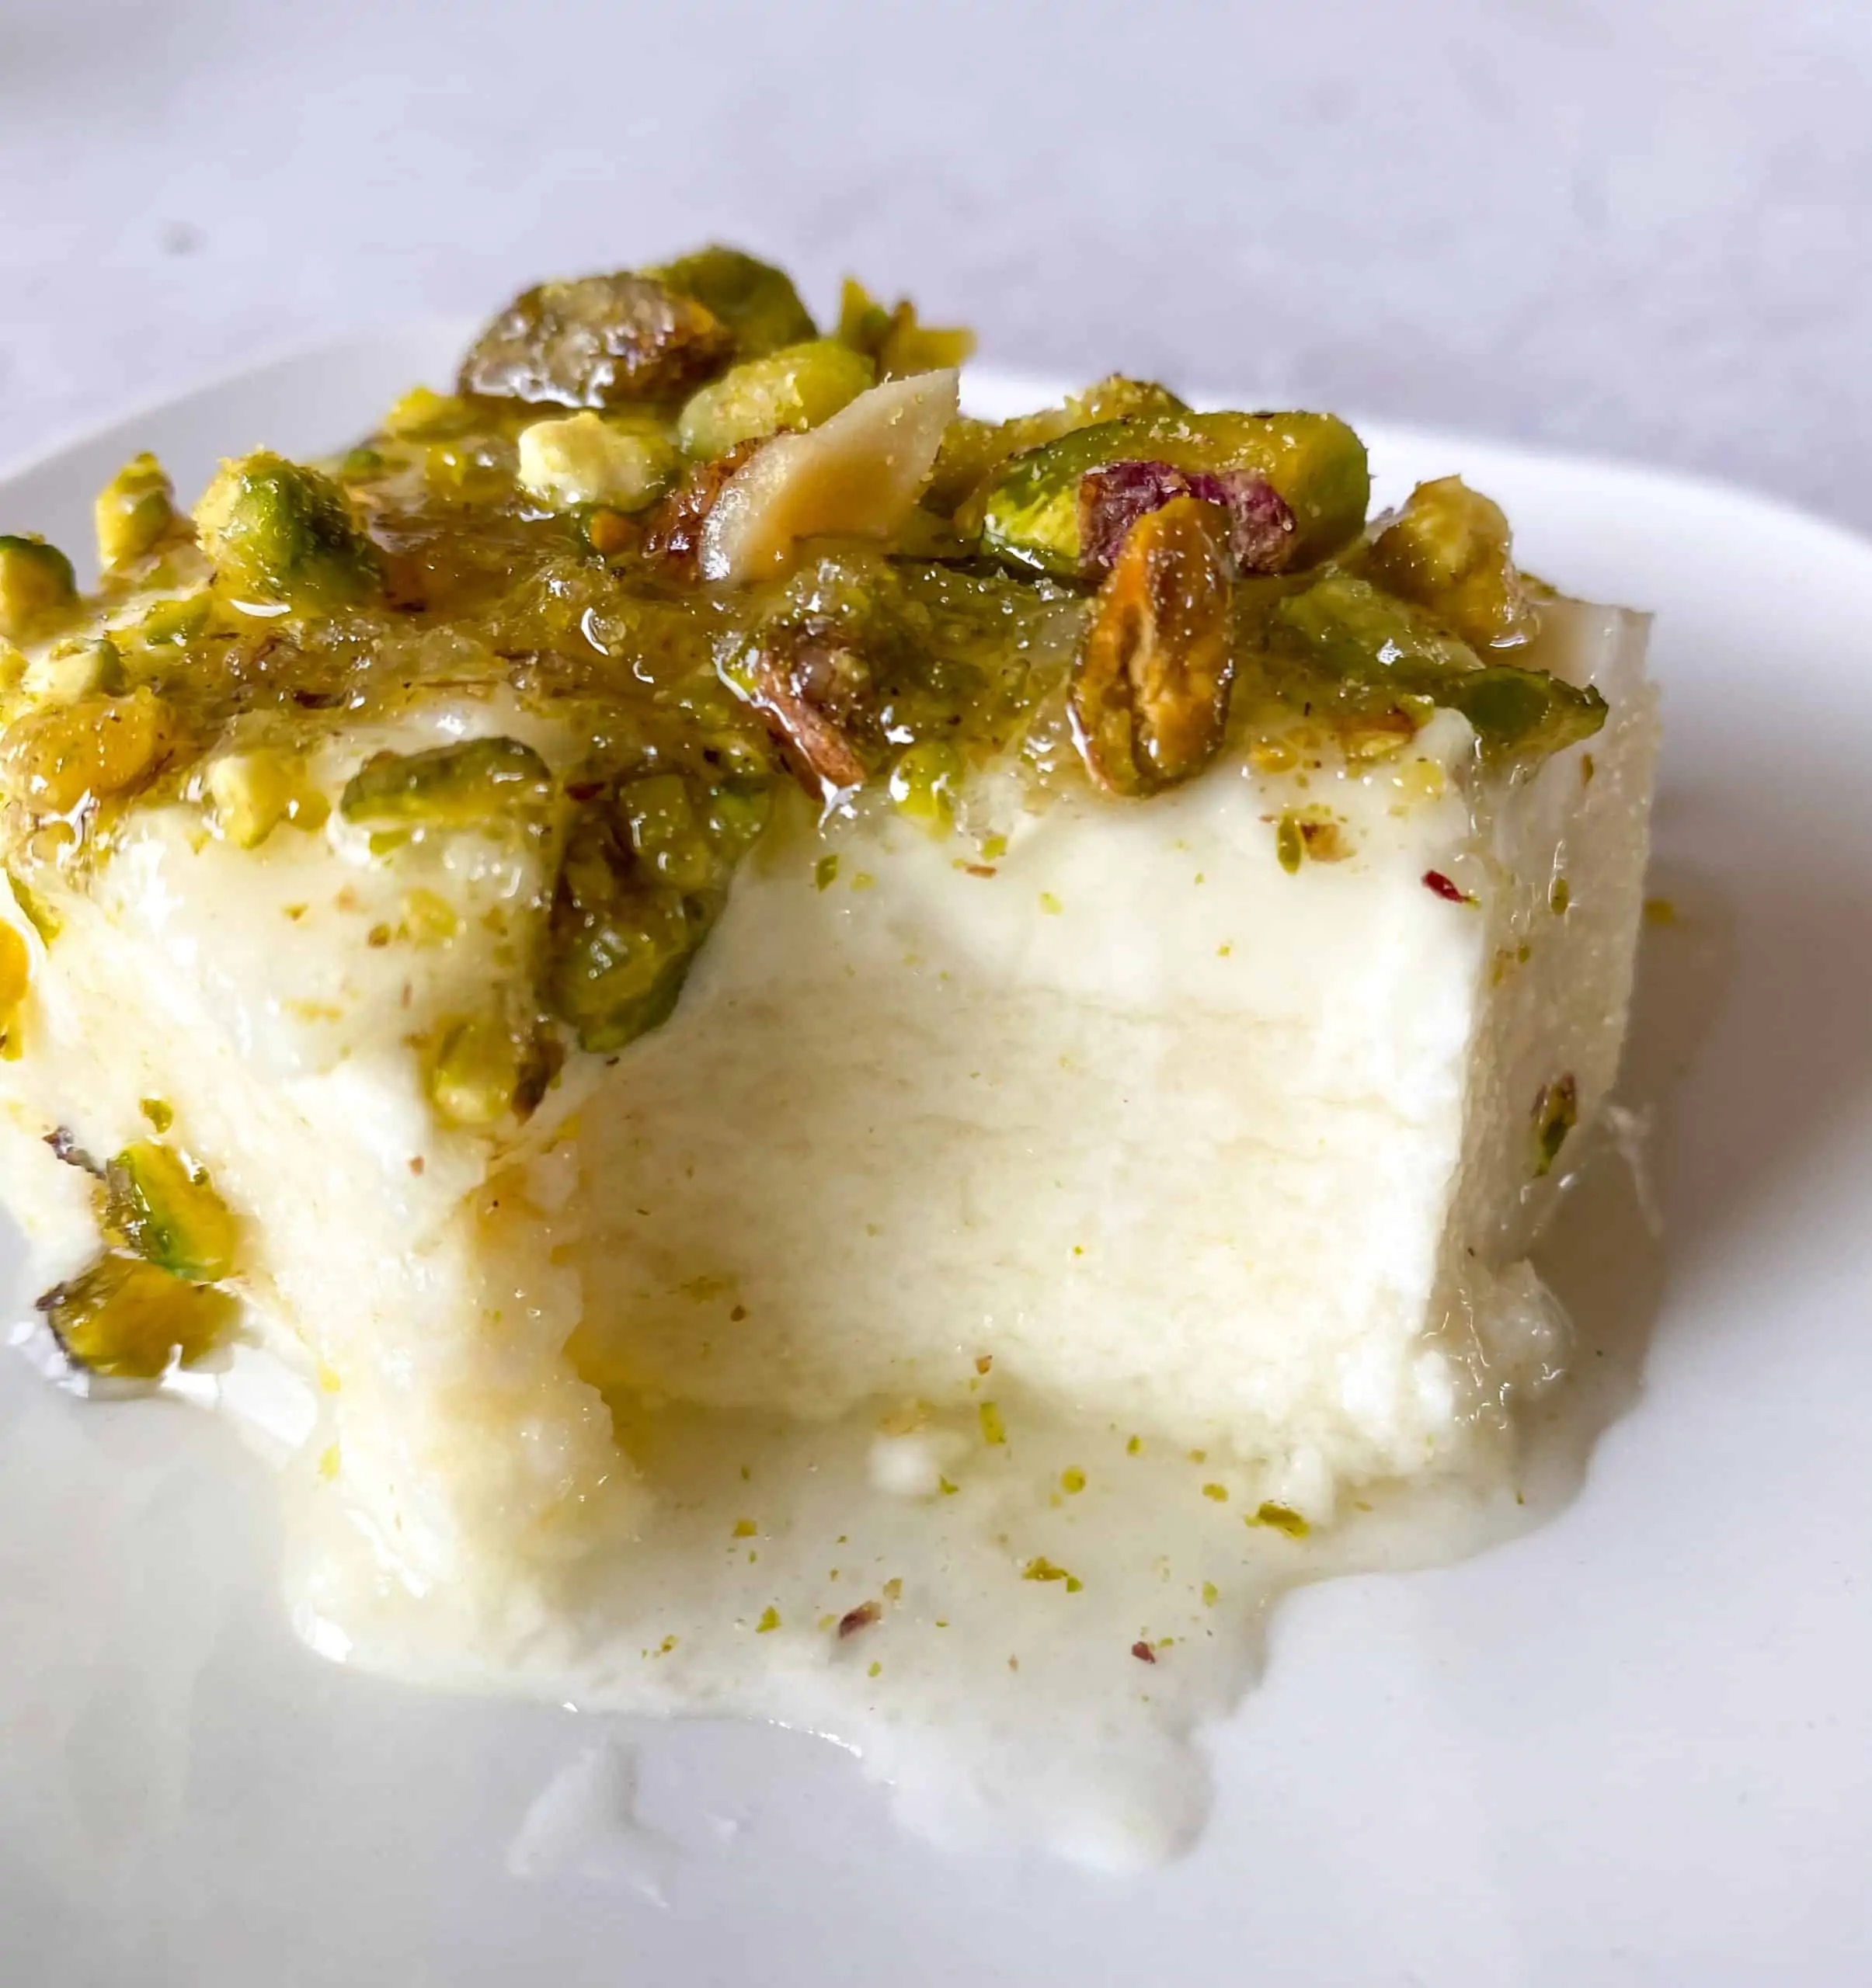 A semolina pudding topped with ashta, simple syrup, and crushed pistachios.